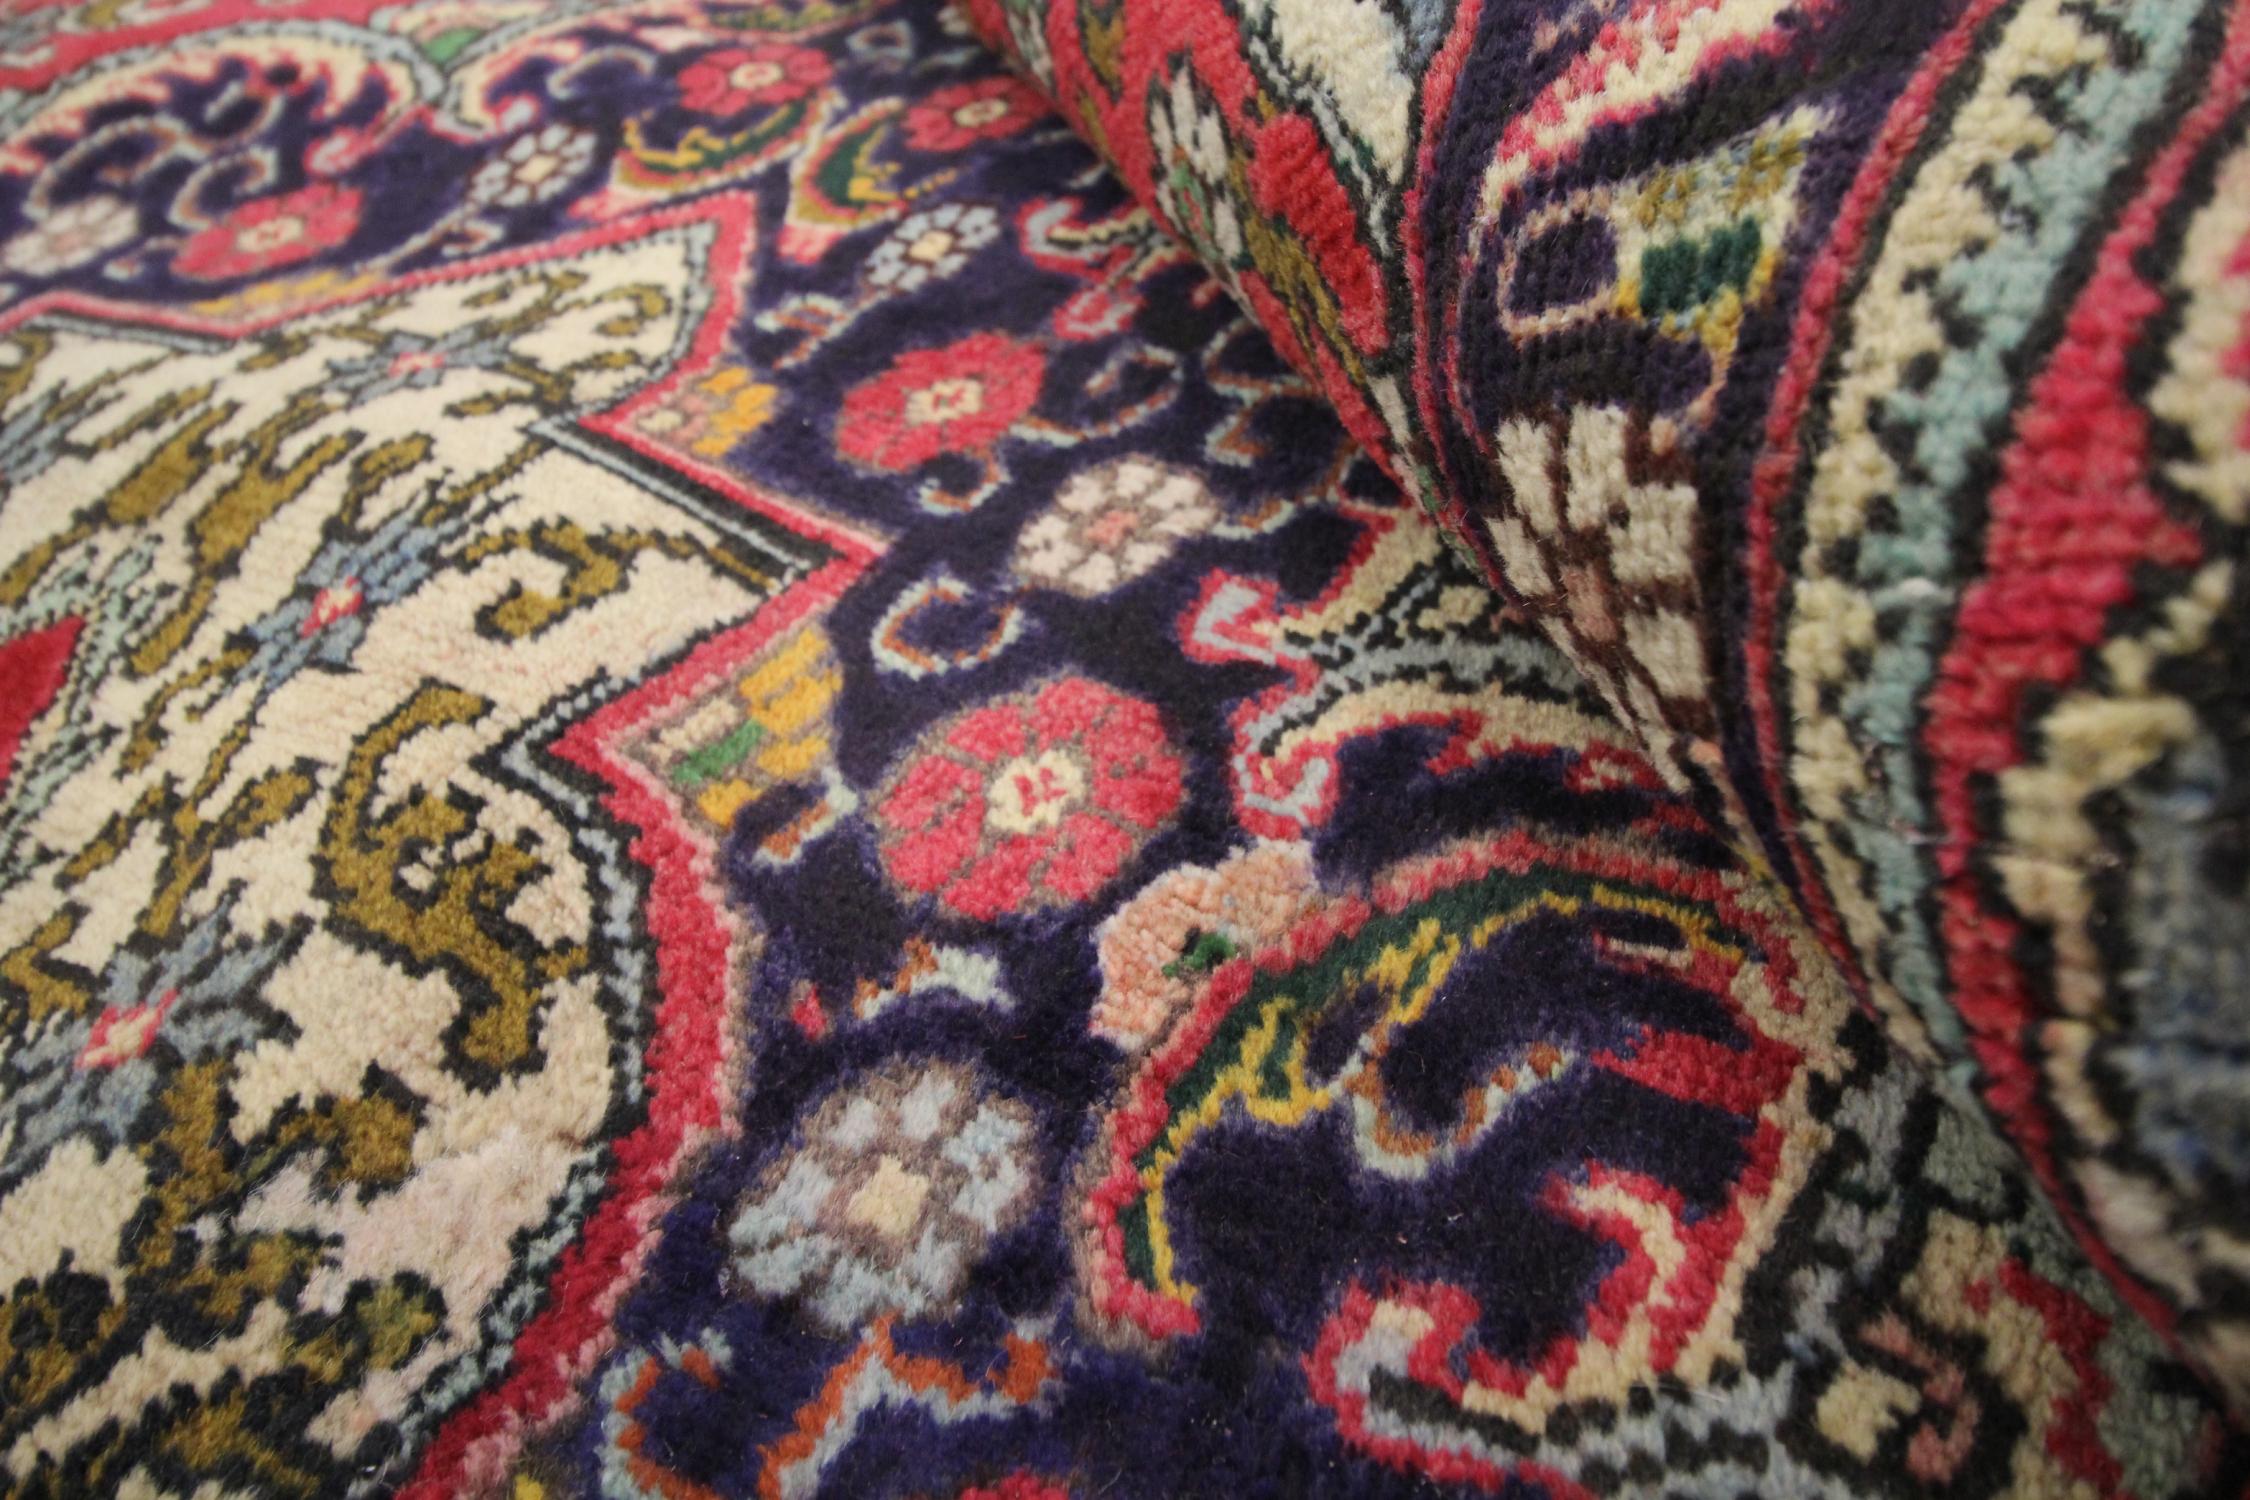 This rich red rug is a traditional red wool carpet woven by hand in the late 20th century, Circa 1970. The design has been woven on a rich red background with accents of brown, cream, blue and green that make up the radiant decorative medallion and